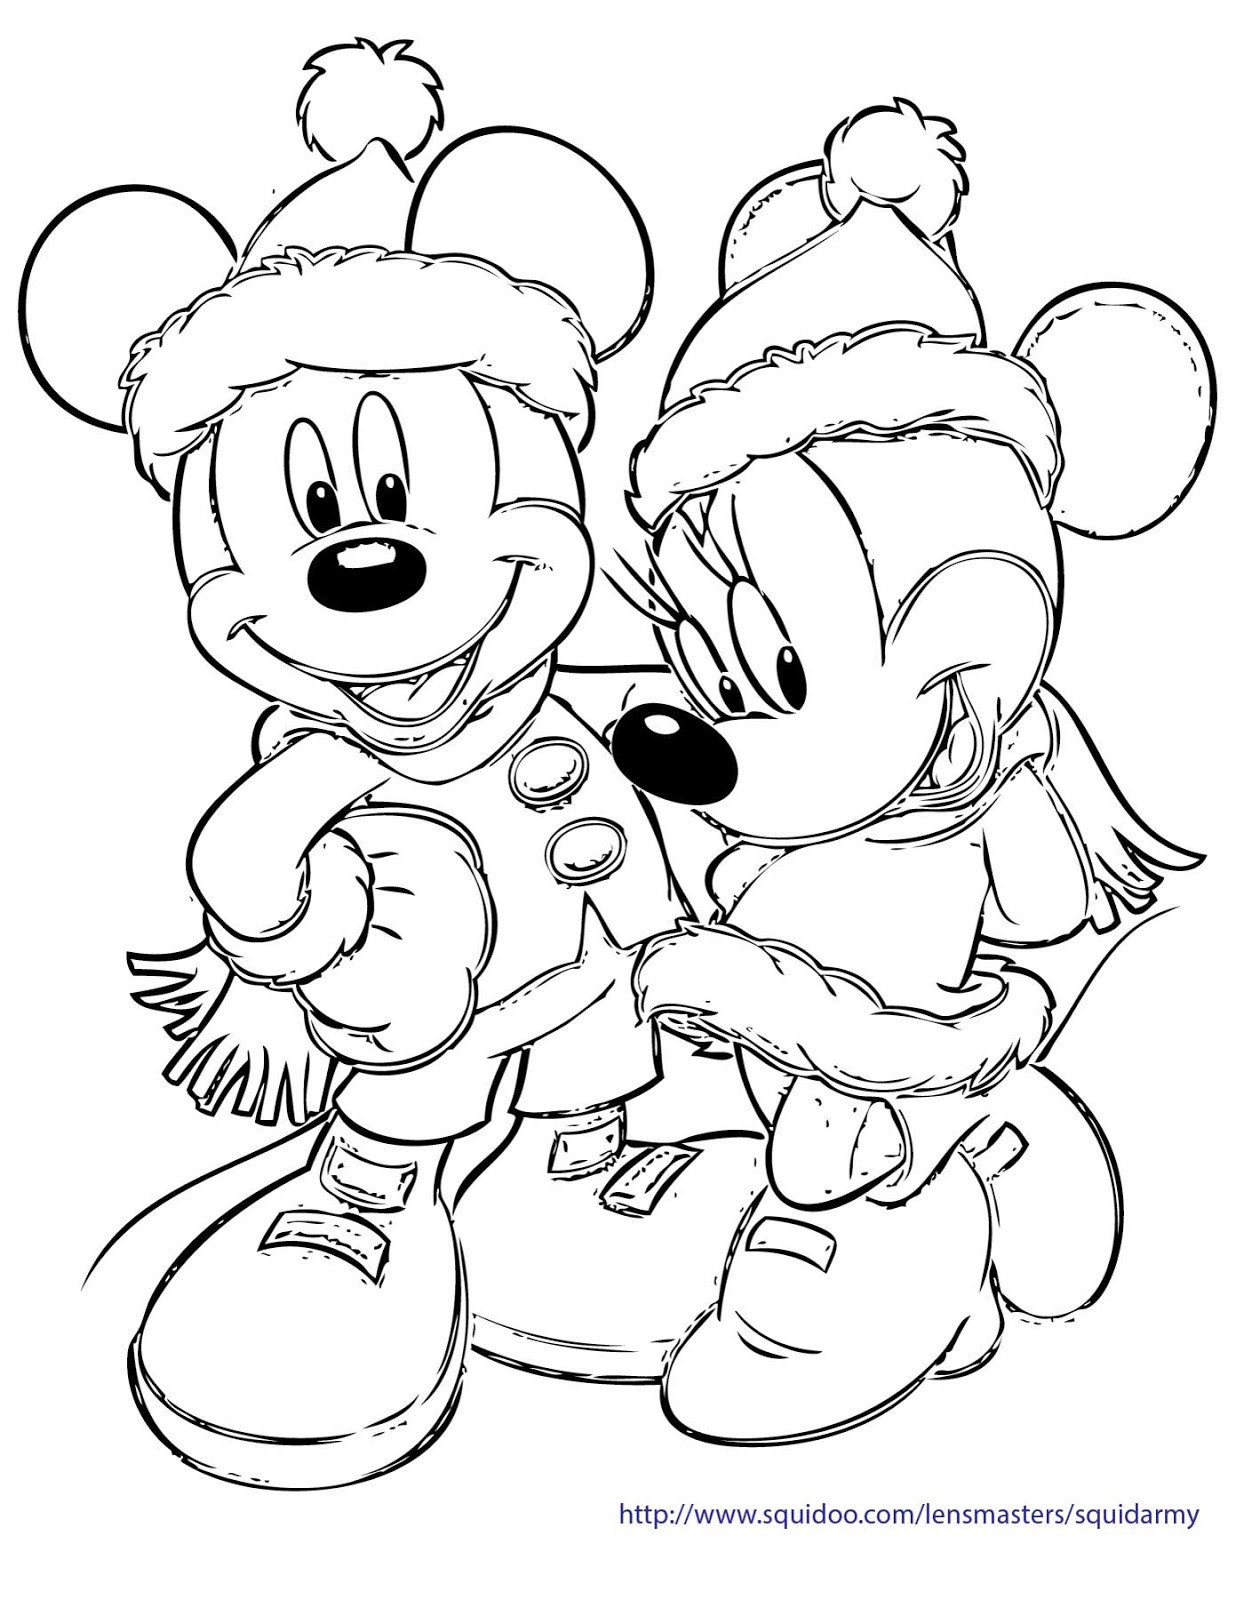 Coloring Pages For Christmas
 Disney Christmas Coloring Pages – Happy Holidays